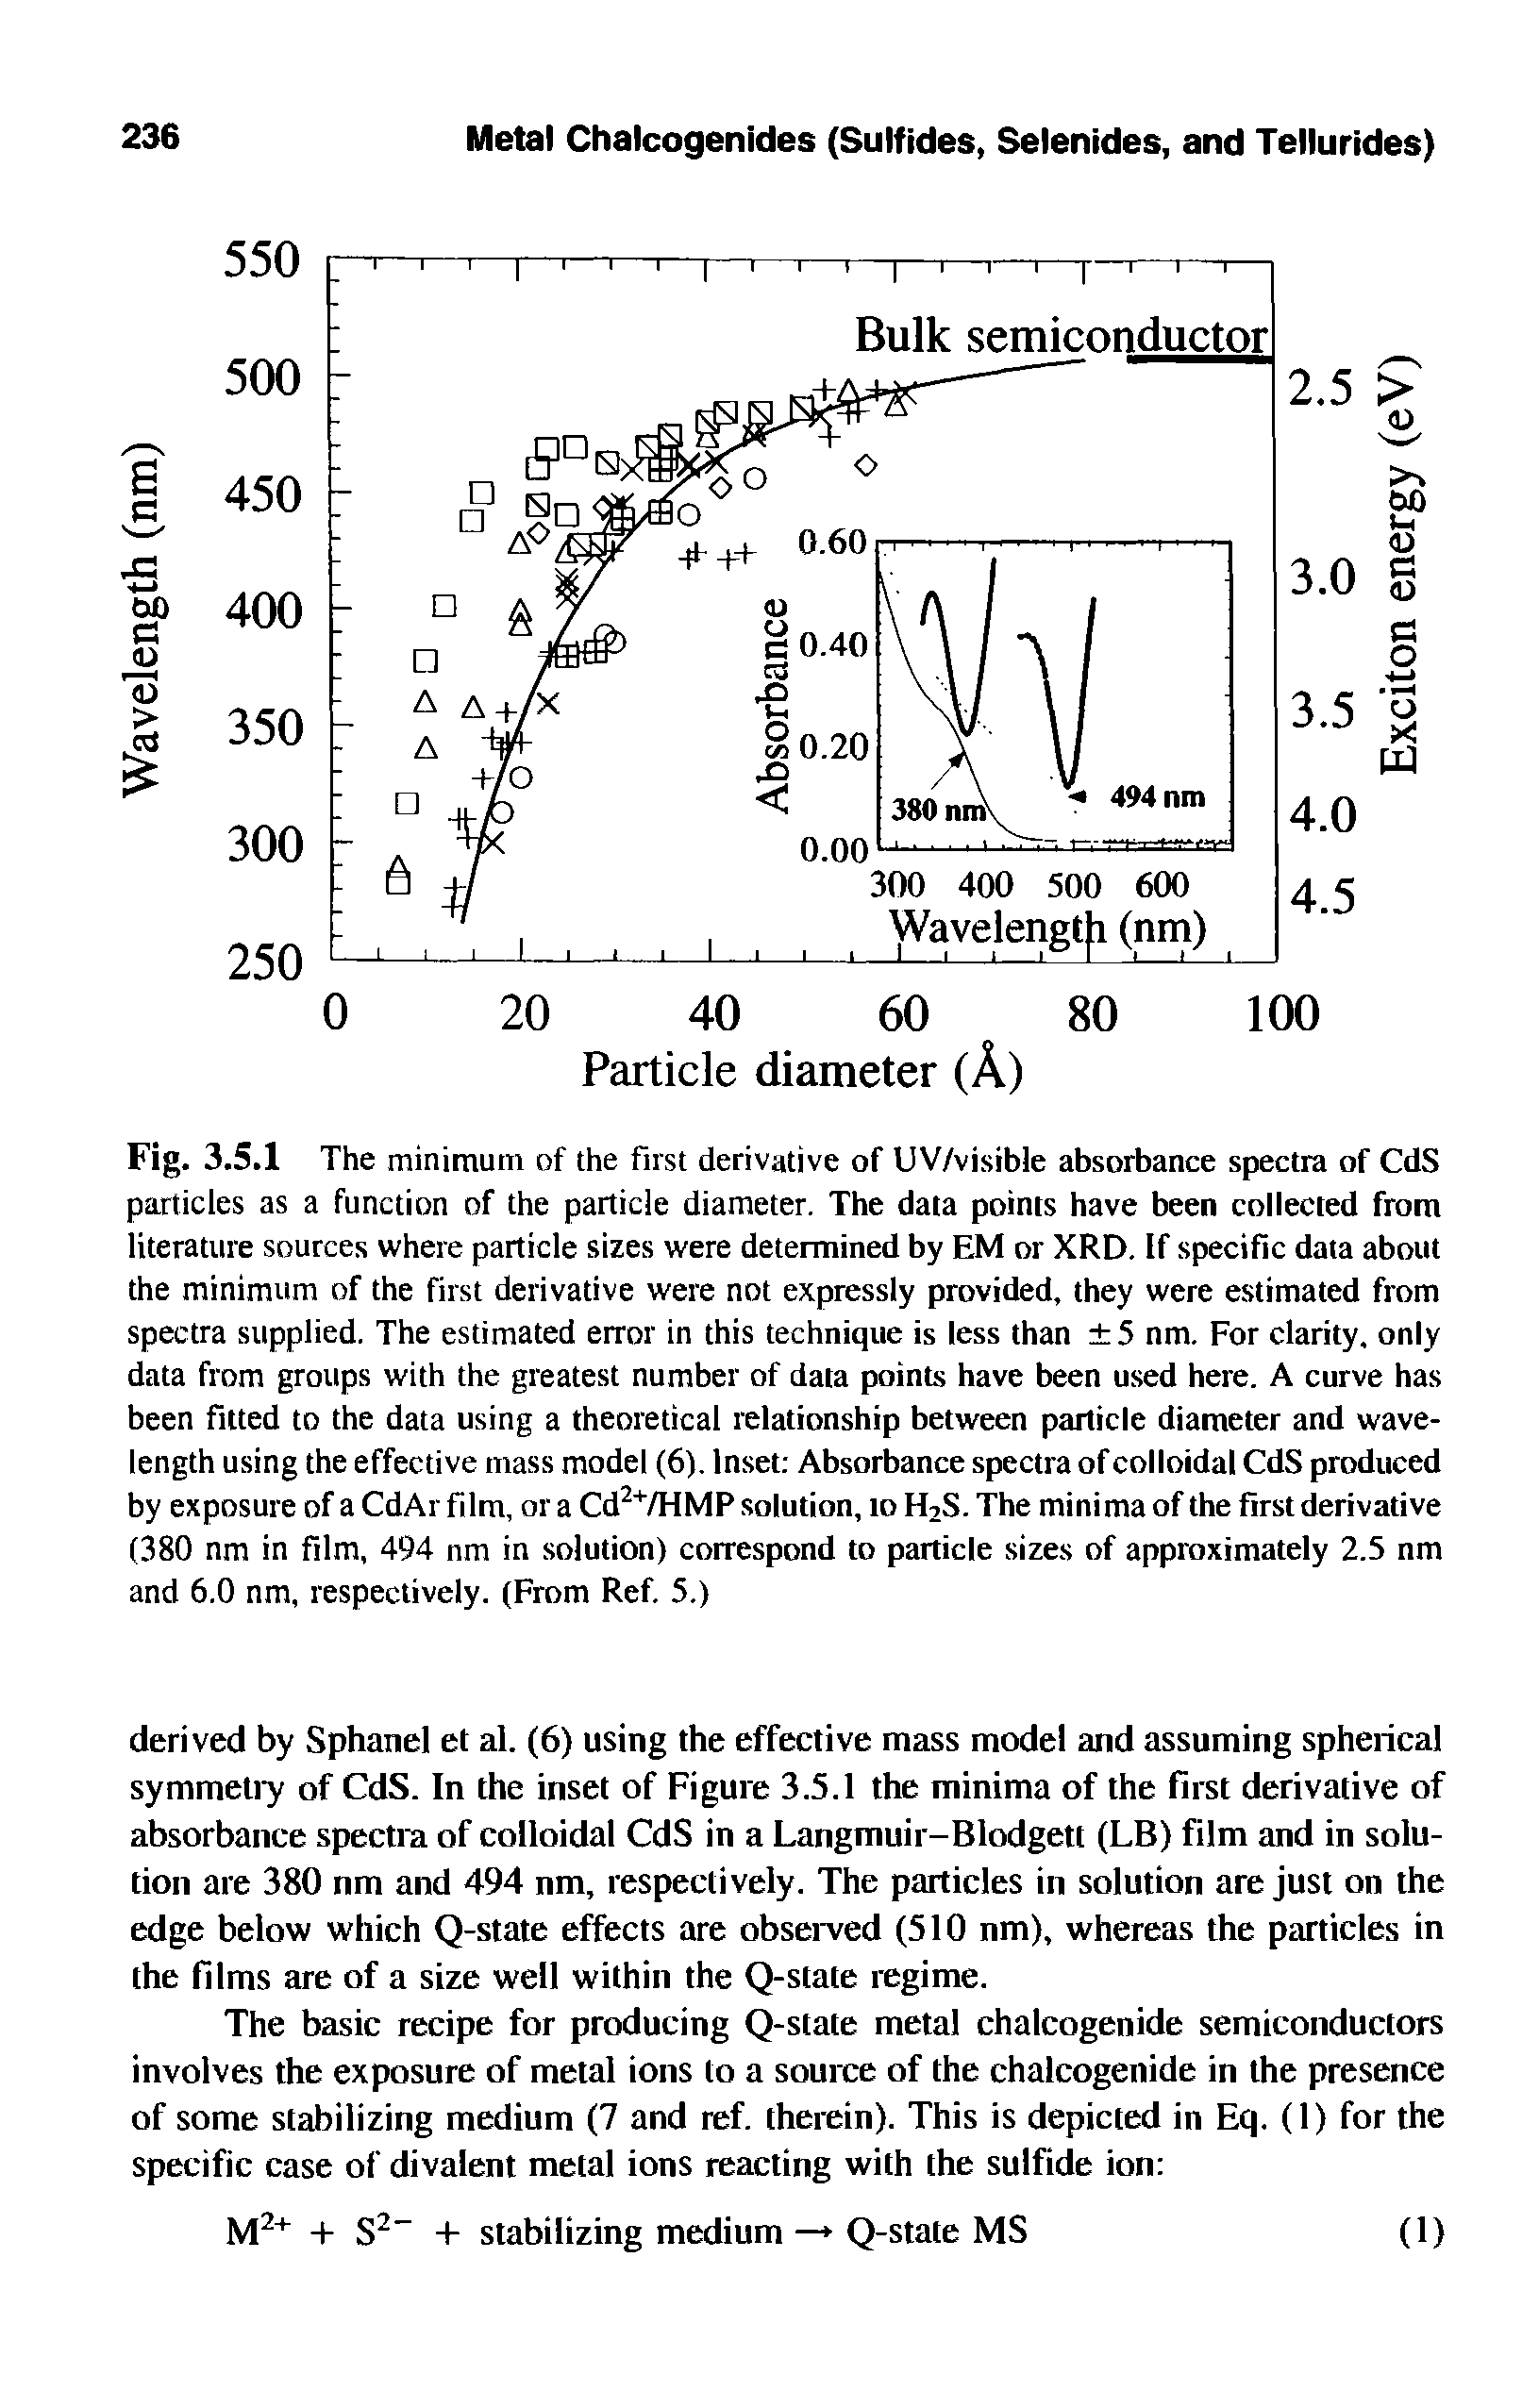 Fig. 3.5.1 The minimum of the first derivative of UV/visible absorbance spectra of CdS particles as a function of the particle diameter. The data points have been collected from literature sources where particle sizes were determined by EM or XRD. If specific data about the minimum of the first derivative were not expressly provided, they were estimated from spectra supplied. The estimated error in this technique is less than 5 nm. For clarity, only data from groups with the greatest number of data points have been used here. A curve has been fitted to the data using a theoretical relationship between particle diameter and wavelength using the effective mass model (6). Inset Absorbance spectra of colloidal CdS produced by exposure of a CdAr film, or a Cd2+/HMP solution, to H S. The minima of the first derivative (380 nm in film, 494 nm in solution) correspond to particle sizes of approximately 2.5 nm and 6.0 nm, respectively. (From Ref. 5.)...